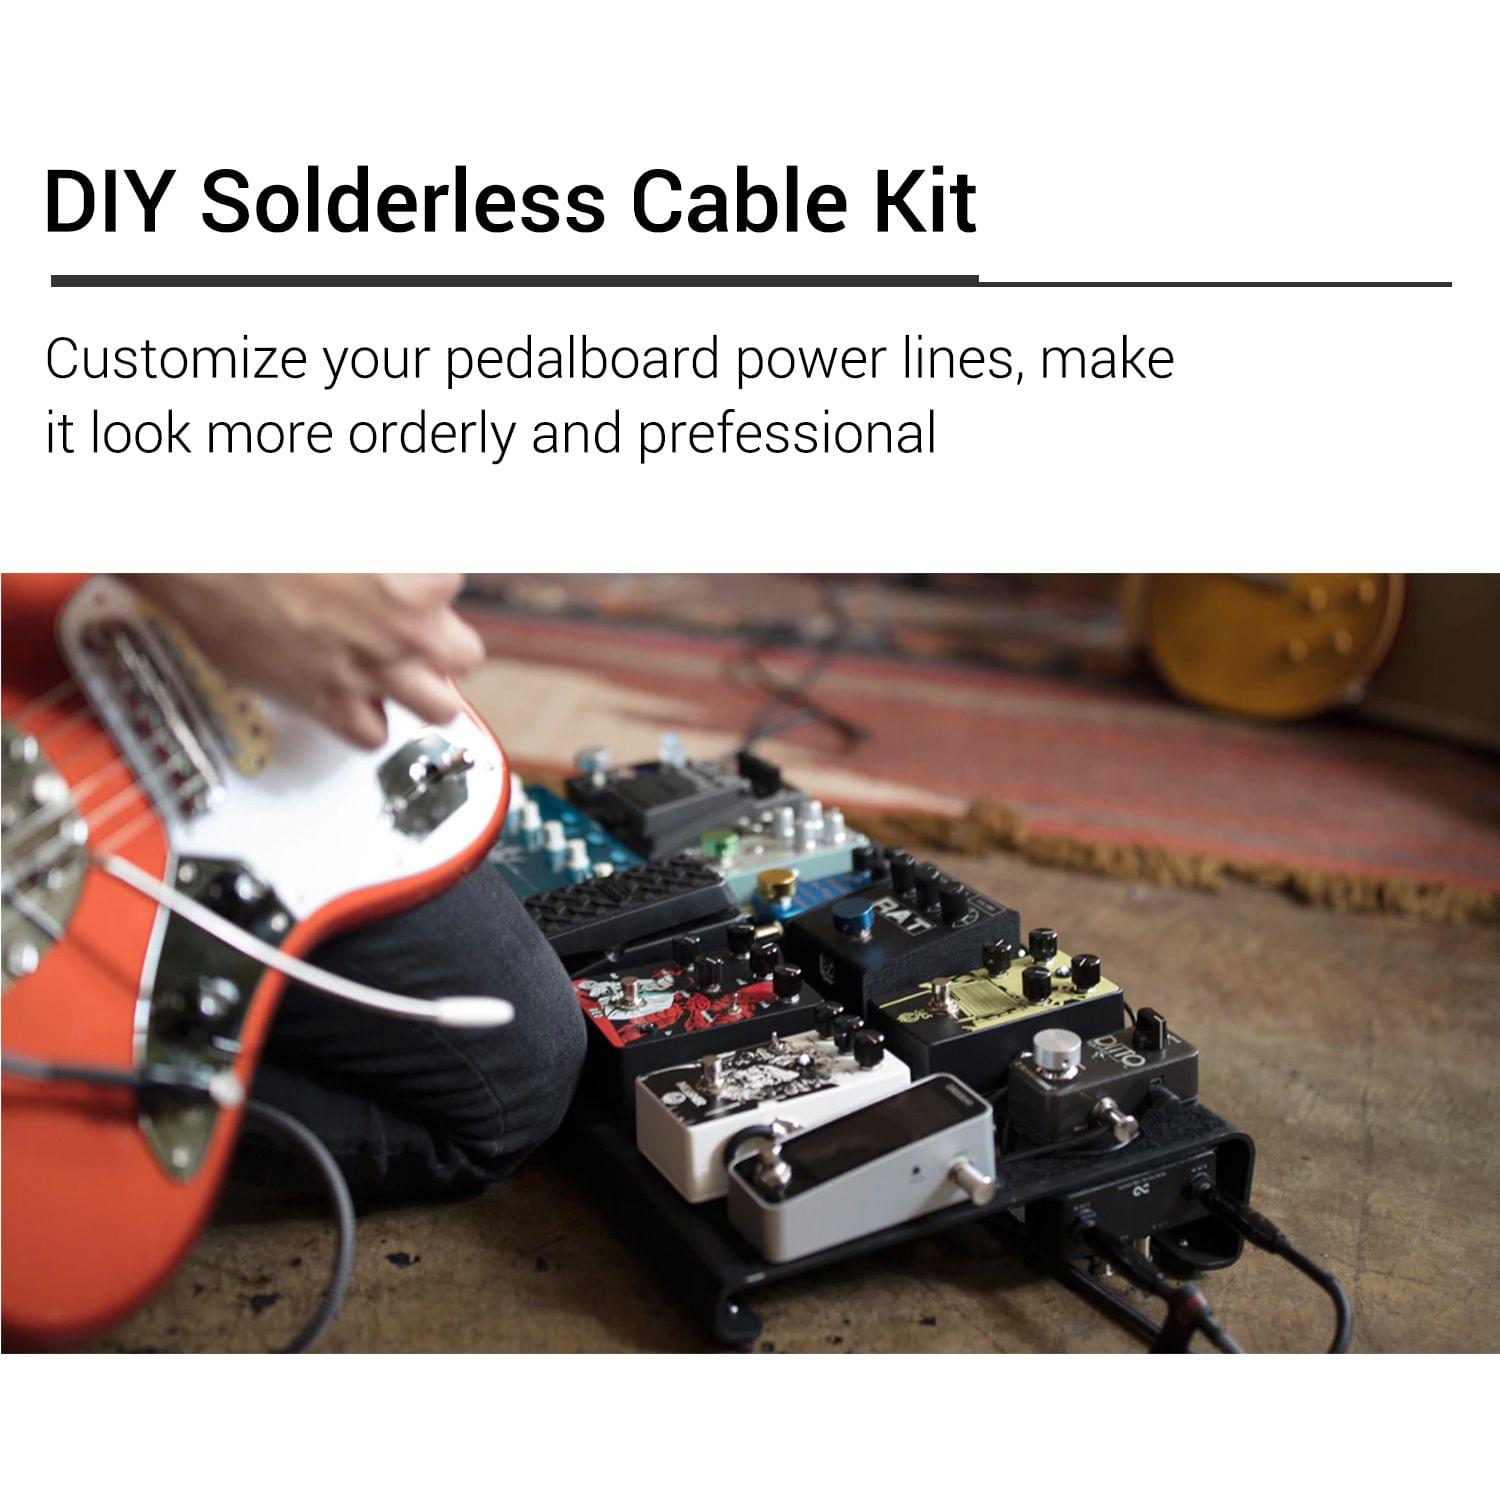 Professional Solderless Patch Cable Kit DIY Guitar Pedal